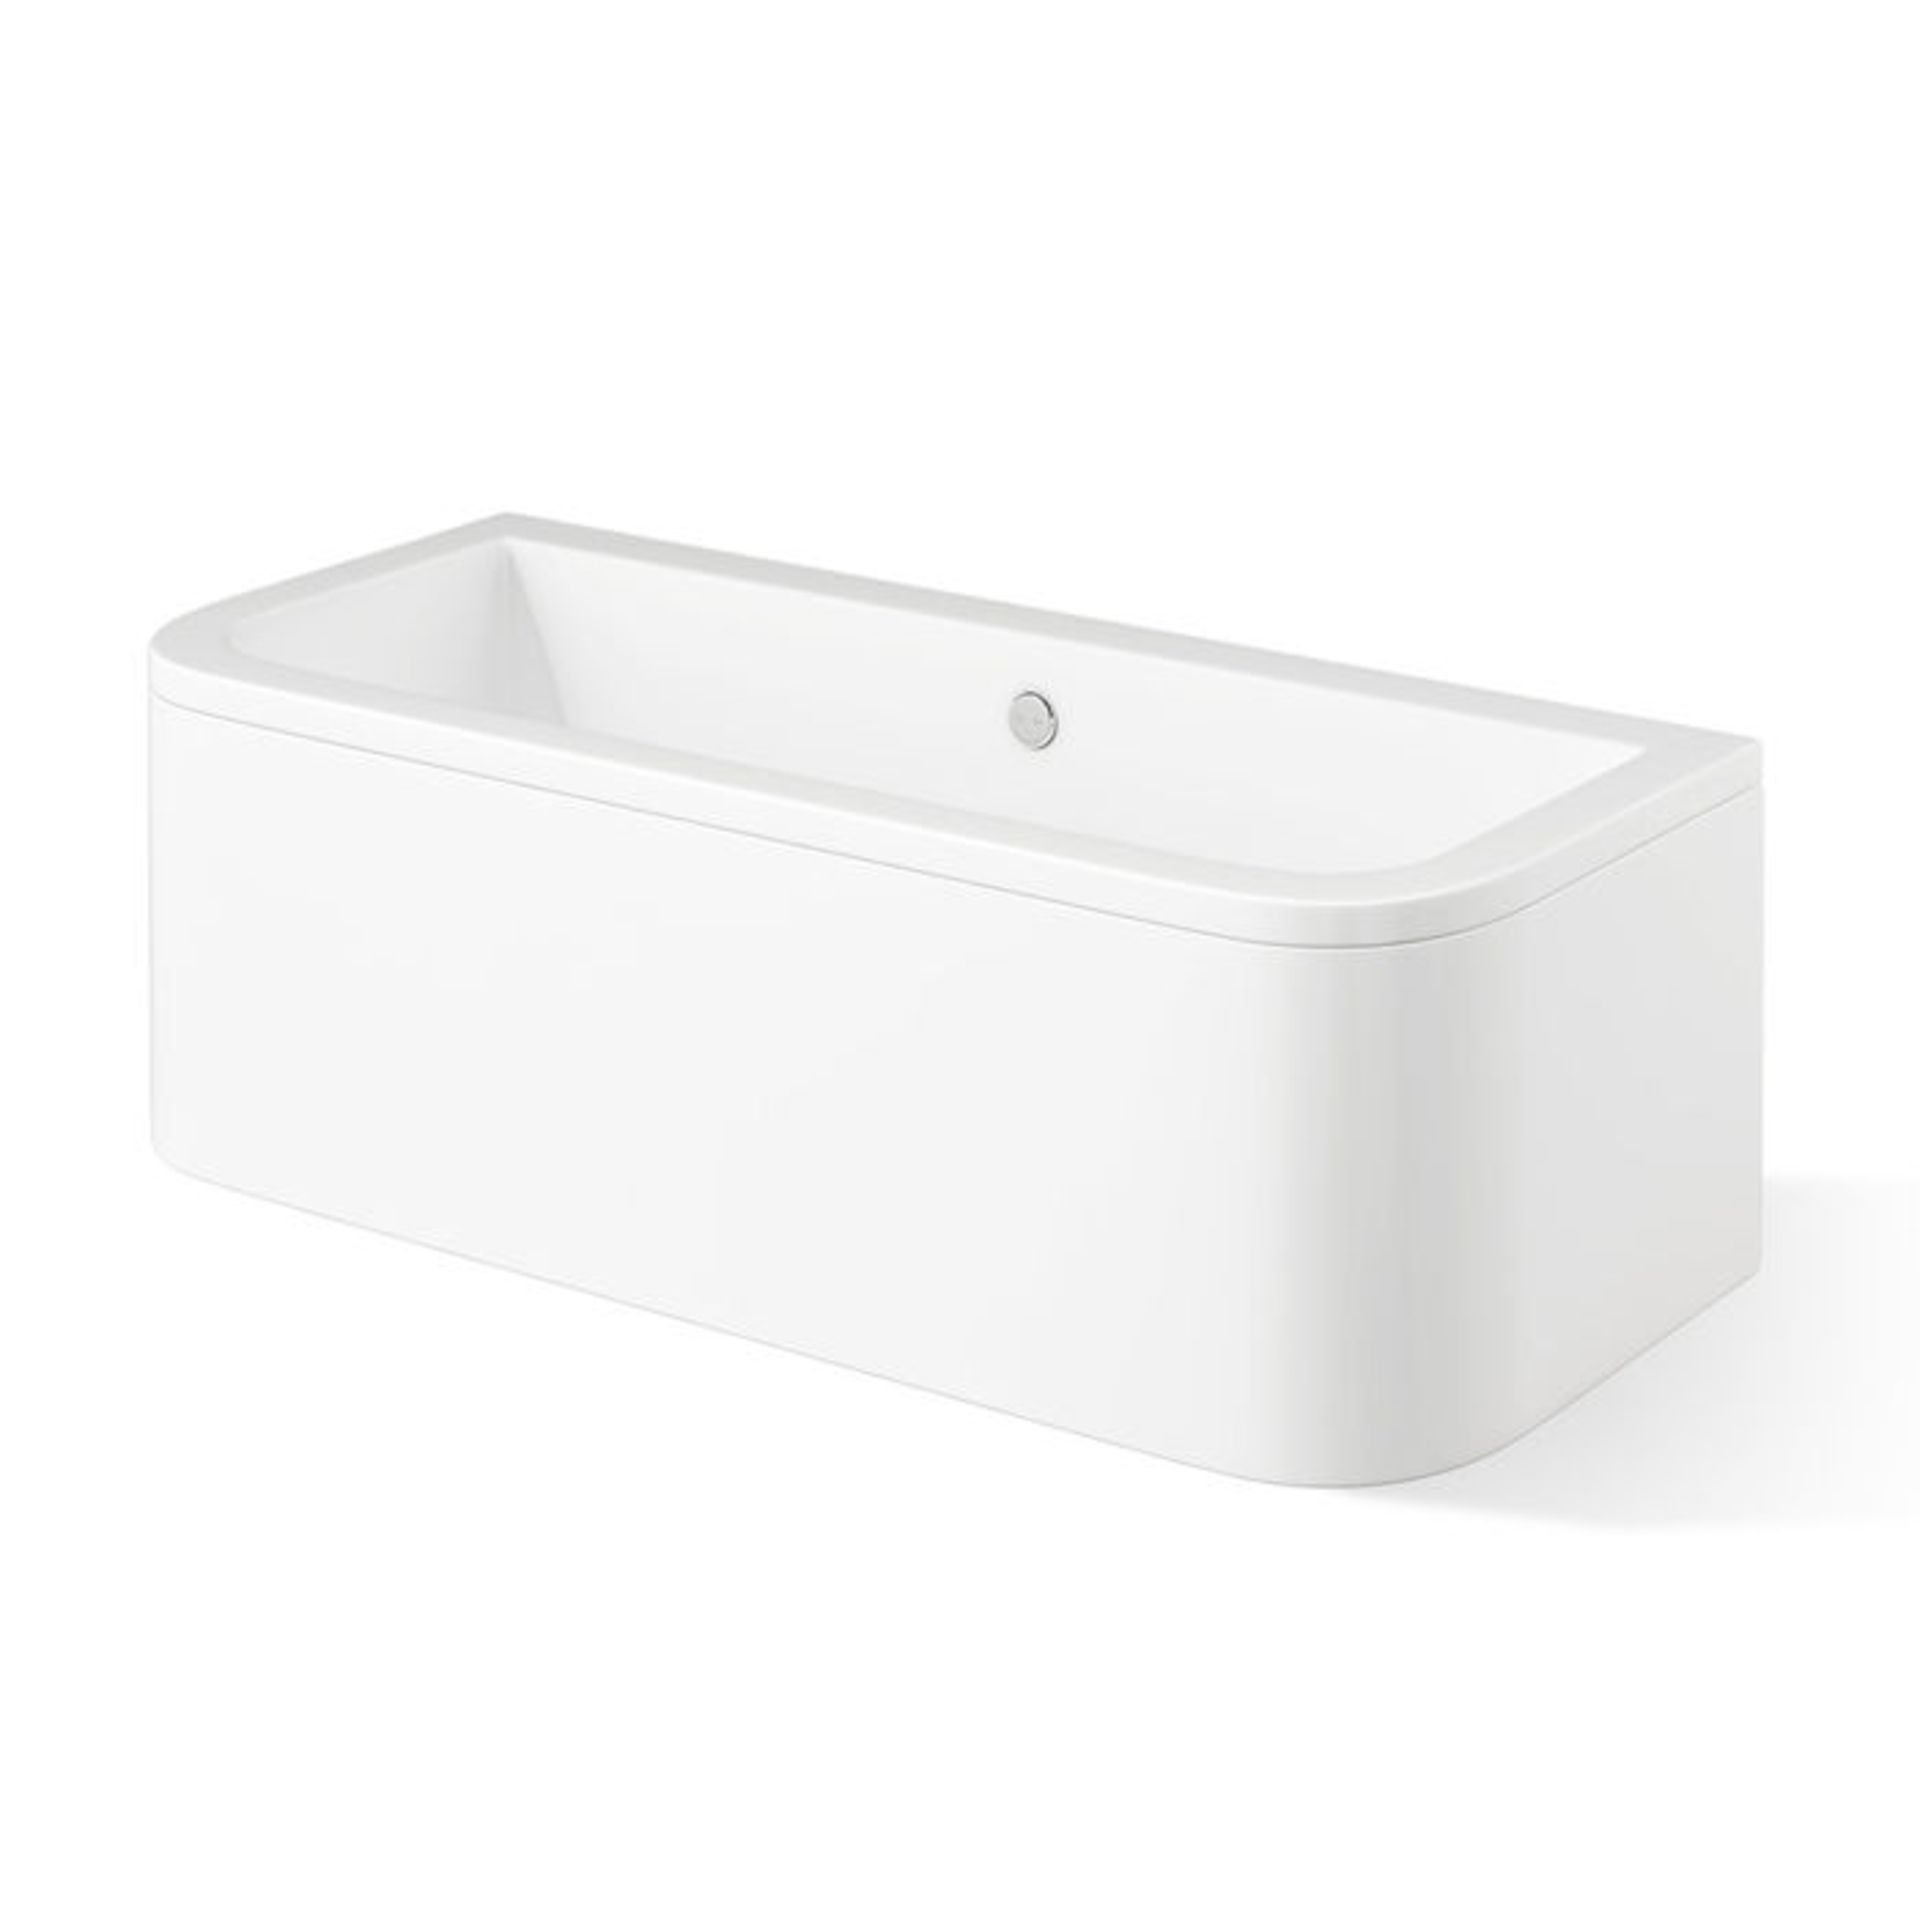 (SA36) 1700x750x460mm Denver Back to Wall Bath - Large. RRP £449.99. The double ended feature - Image 3 of 4